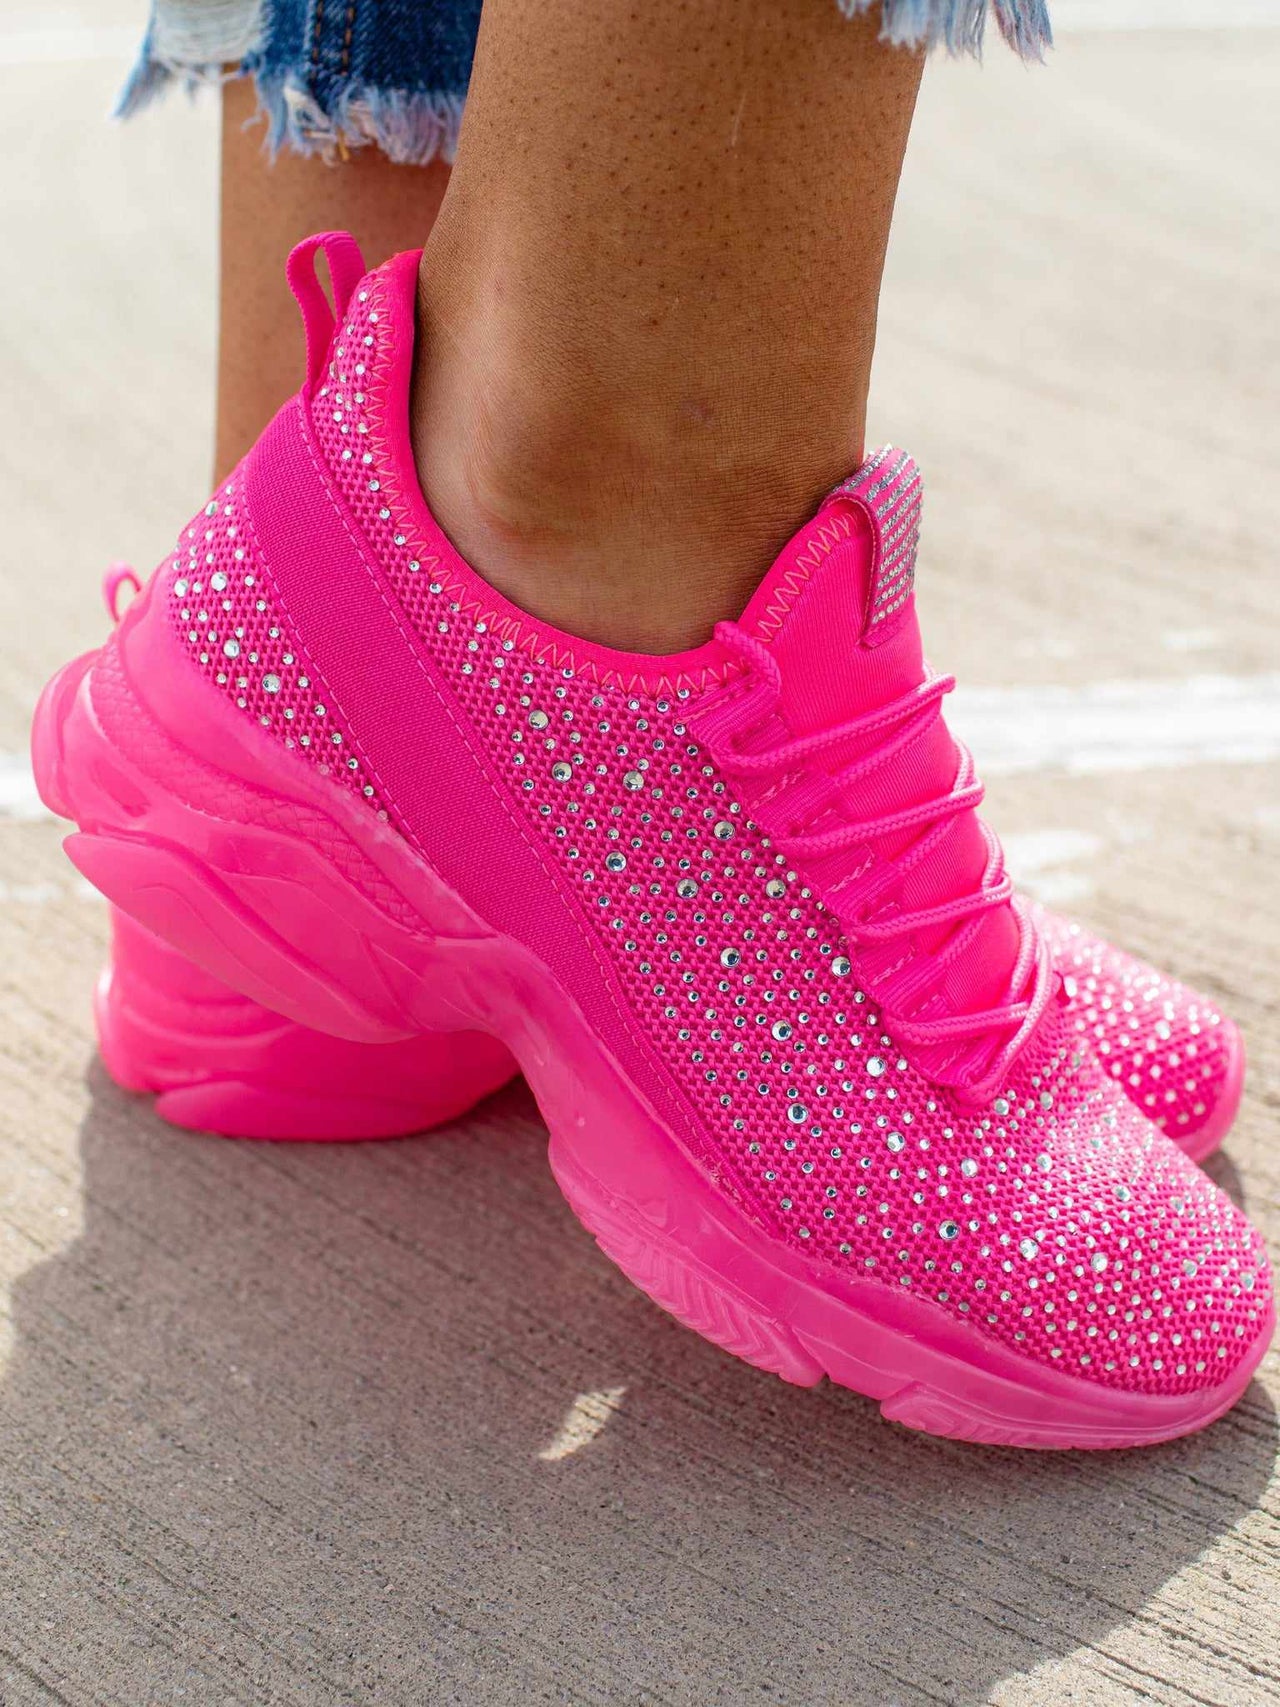 Barbiecore hot pink sneakers with rhinestones.